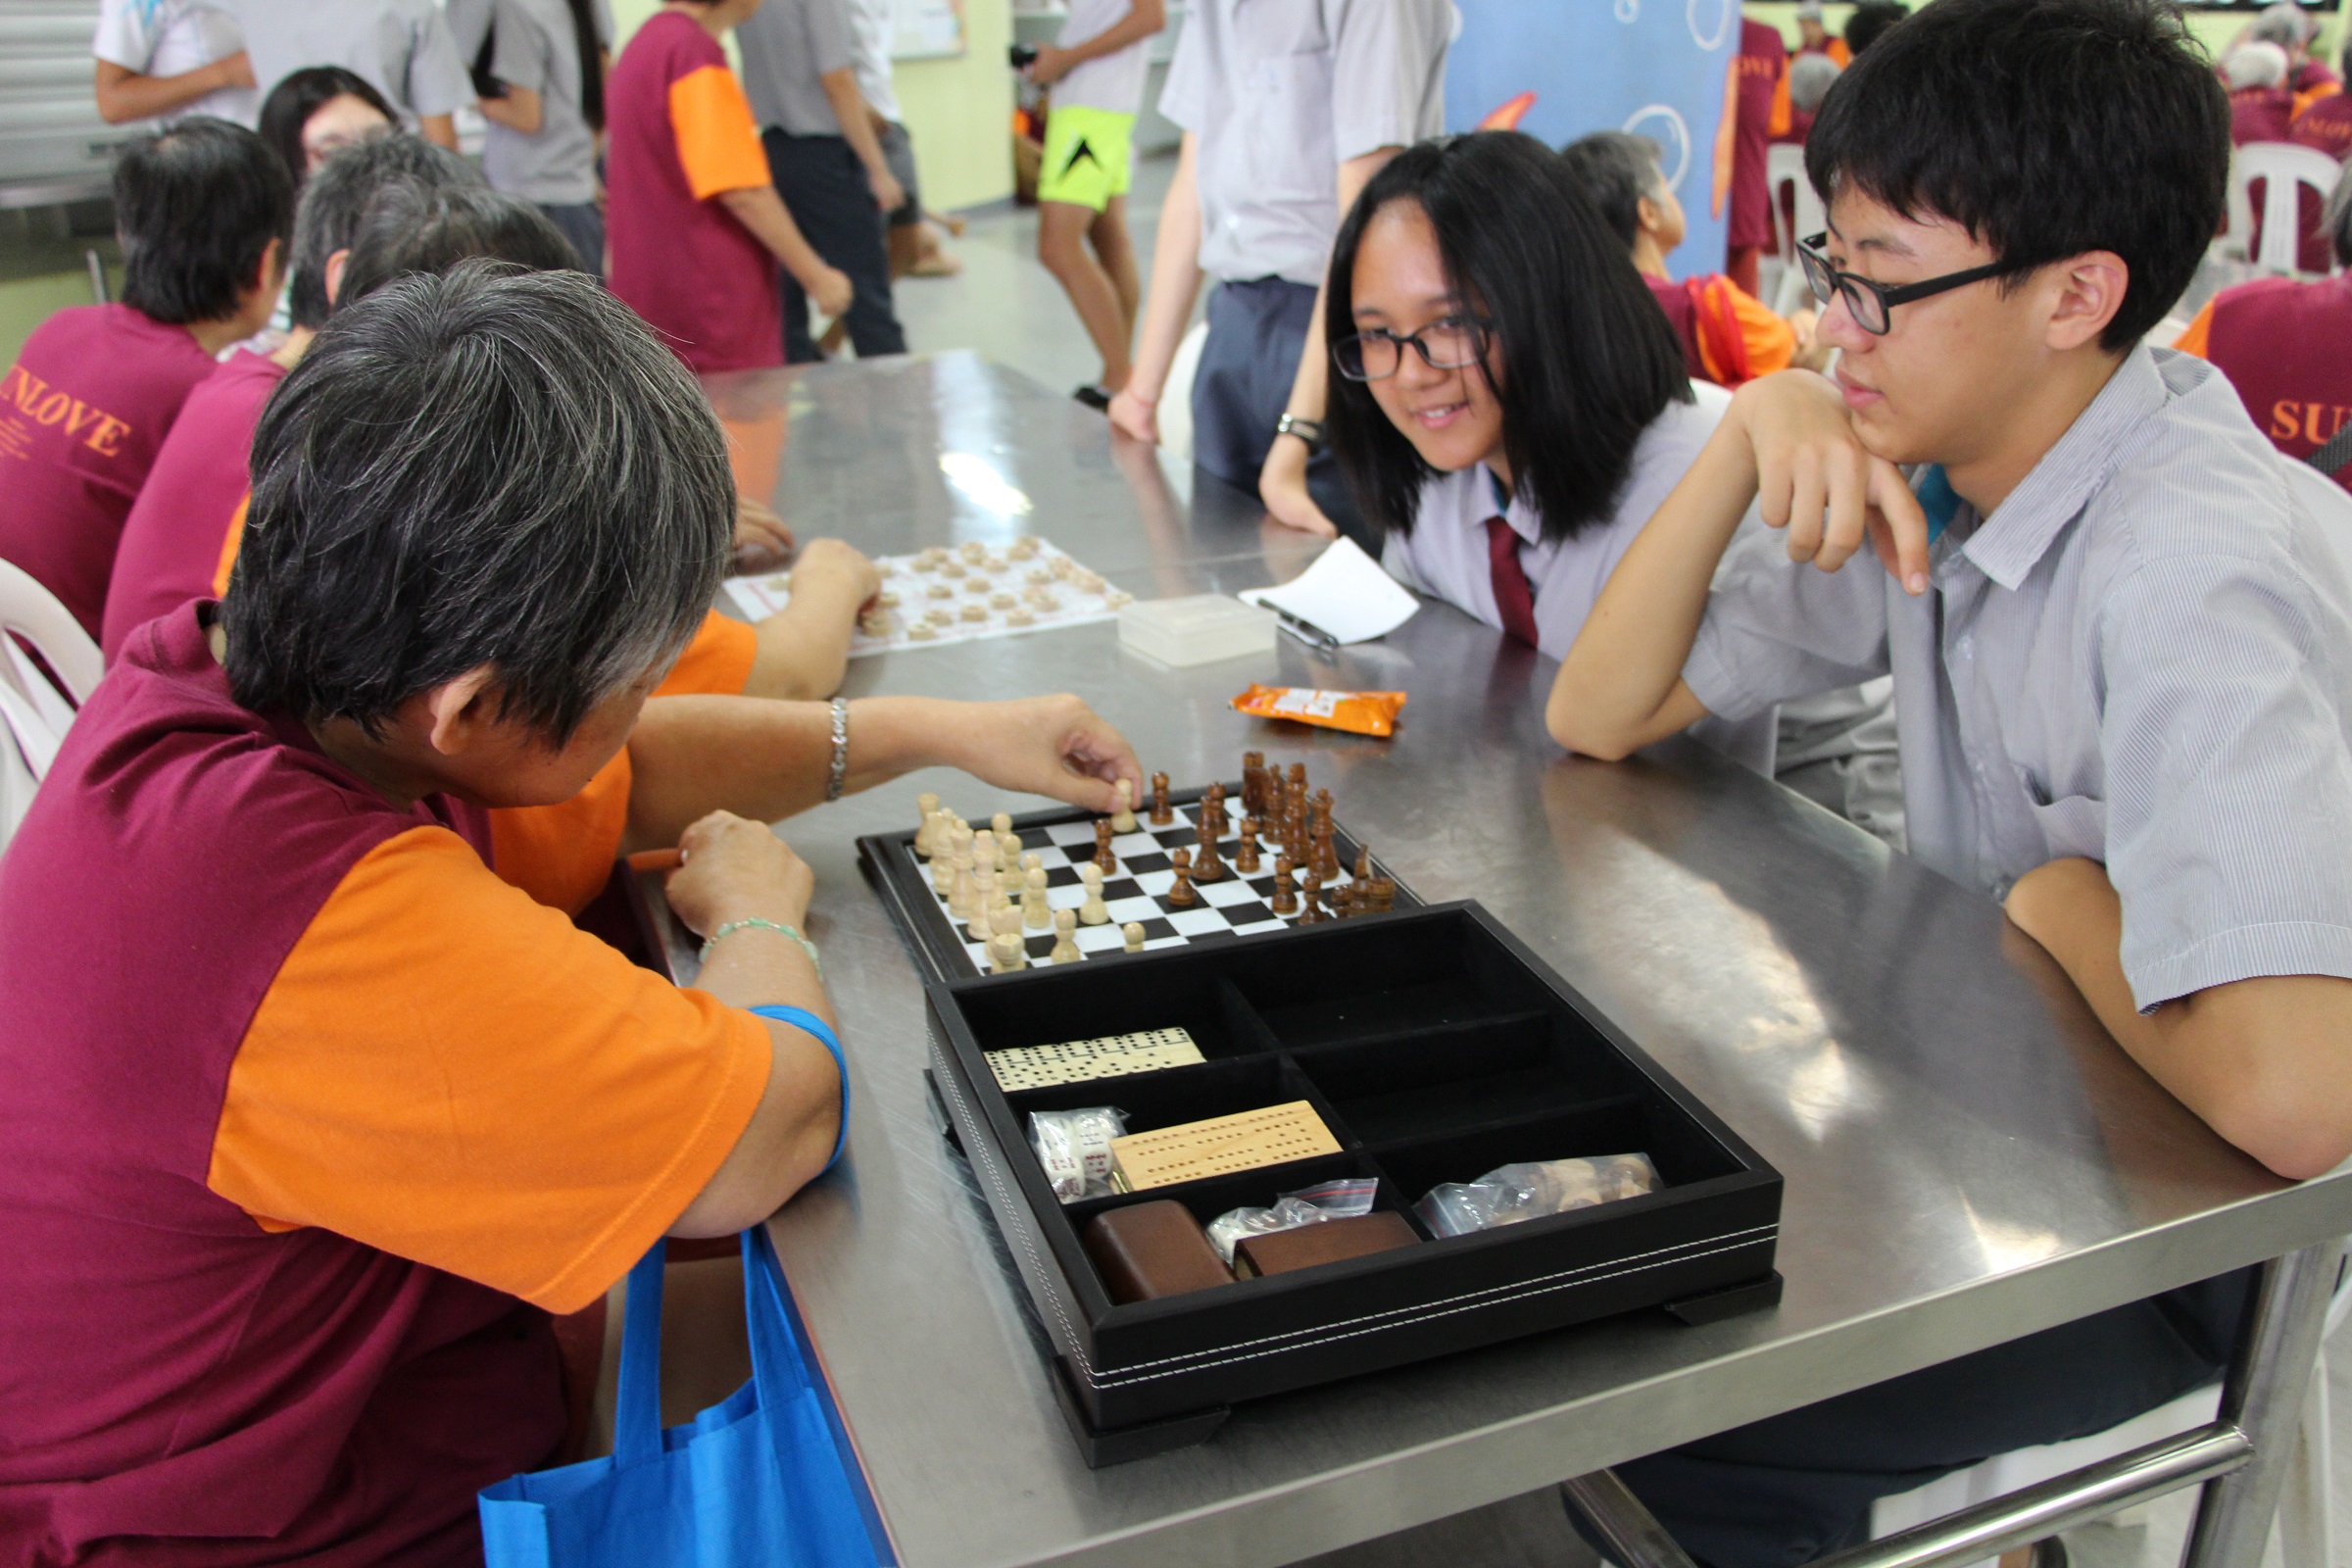 Total Defence is as much about building bonds: Students of Bowen Secondary play chess with residents of Sunlove Home. (Photo credit: Bowen Secondary School)